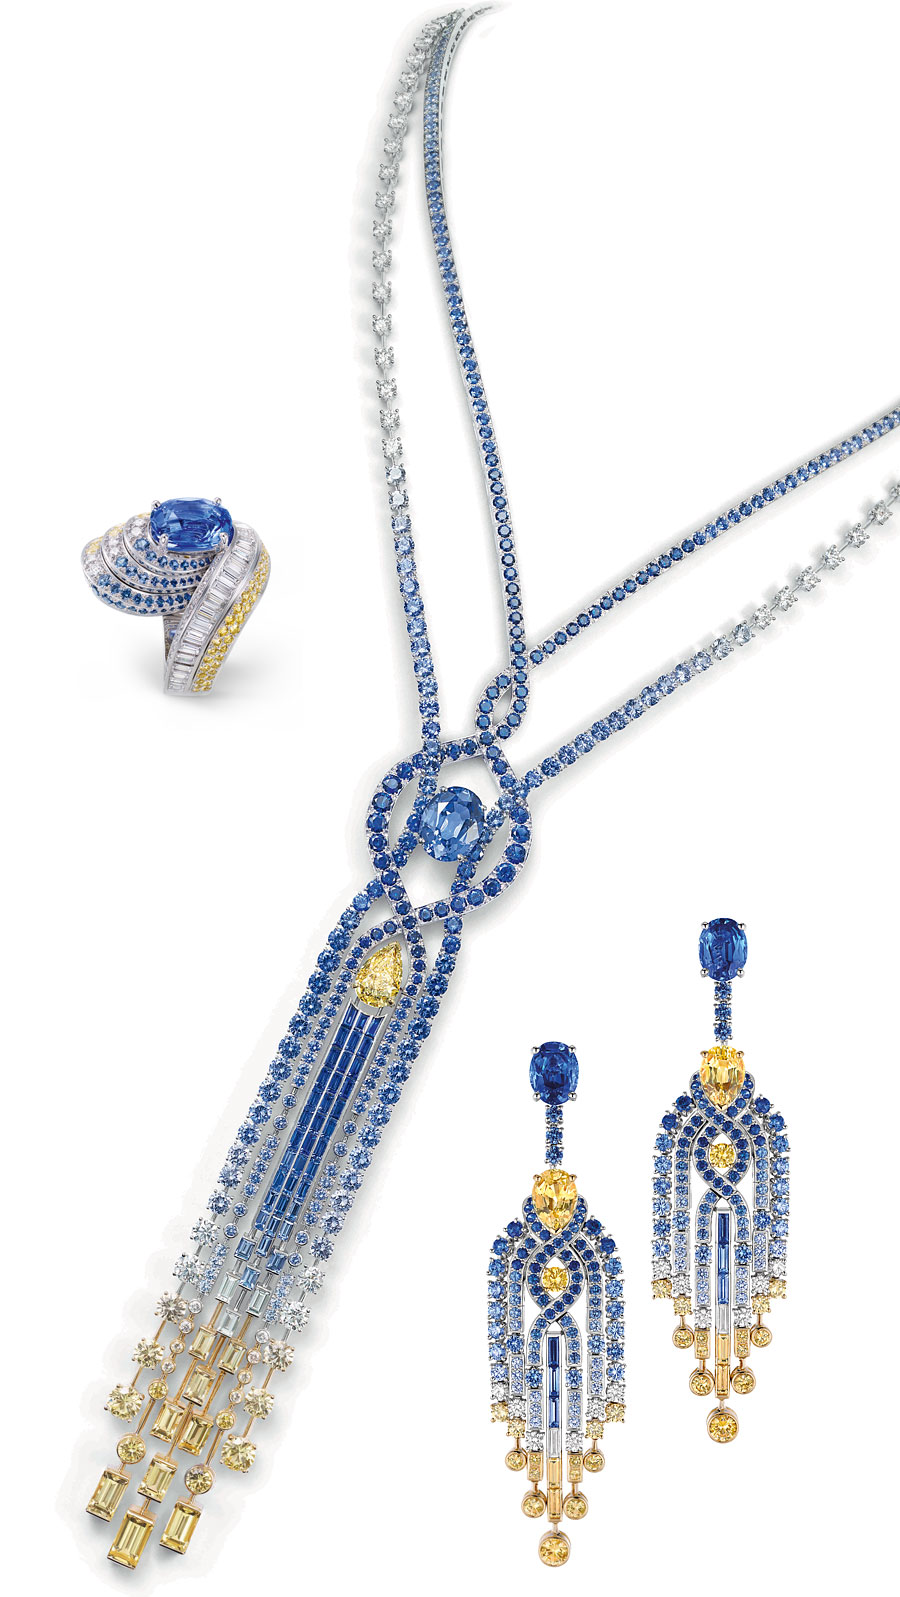 On the right you see a pair of earrings set with diamonds, round and baguette-cut blue and yellow sapphires, two pear-shaped yellow sapphires of 2.23cts and 2.51 cts and two oval-cut blue sapphires from Ceylon, one - 2.72 carats, the other 3.32 carats. The necklace of sapphires and diamonds features a pear-shaped VVS1 Fancy Yellow diamond of 3.77 carats and an oval-cut blue Ceylon sapphire of 10.23 cts. The ring in white gold, set with brilliant-cut, square-cut and baguette-cut diamonds, round blue and yellow sapphires and an oval-cut 5.10 cts sapphire from Madagascar.